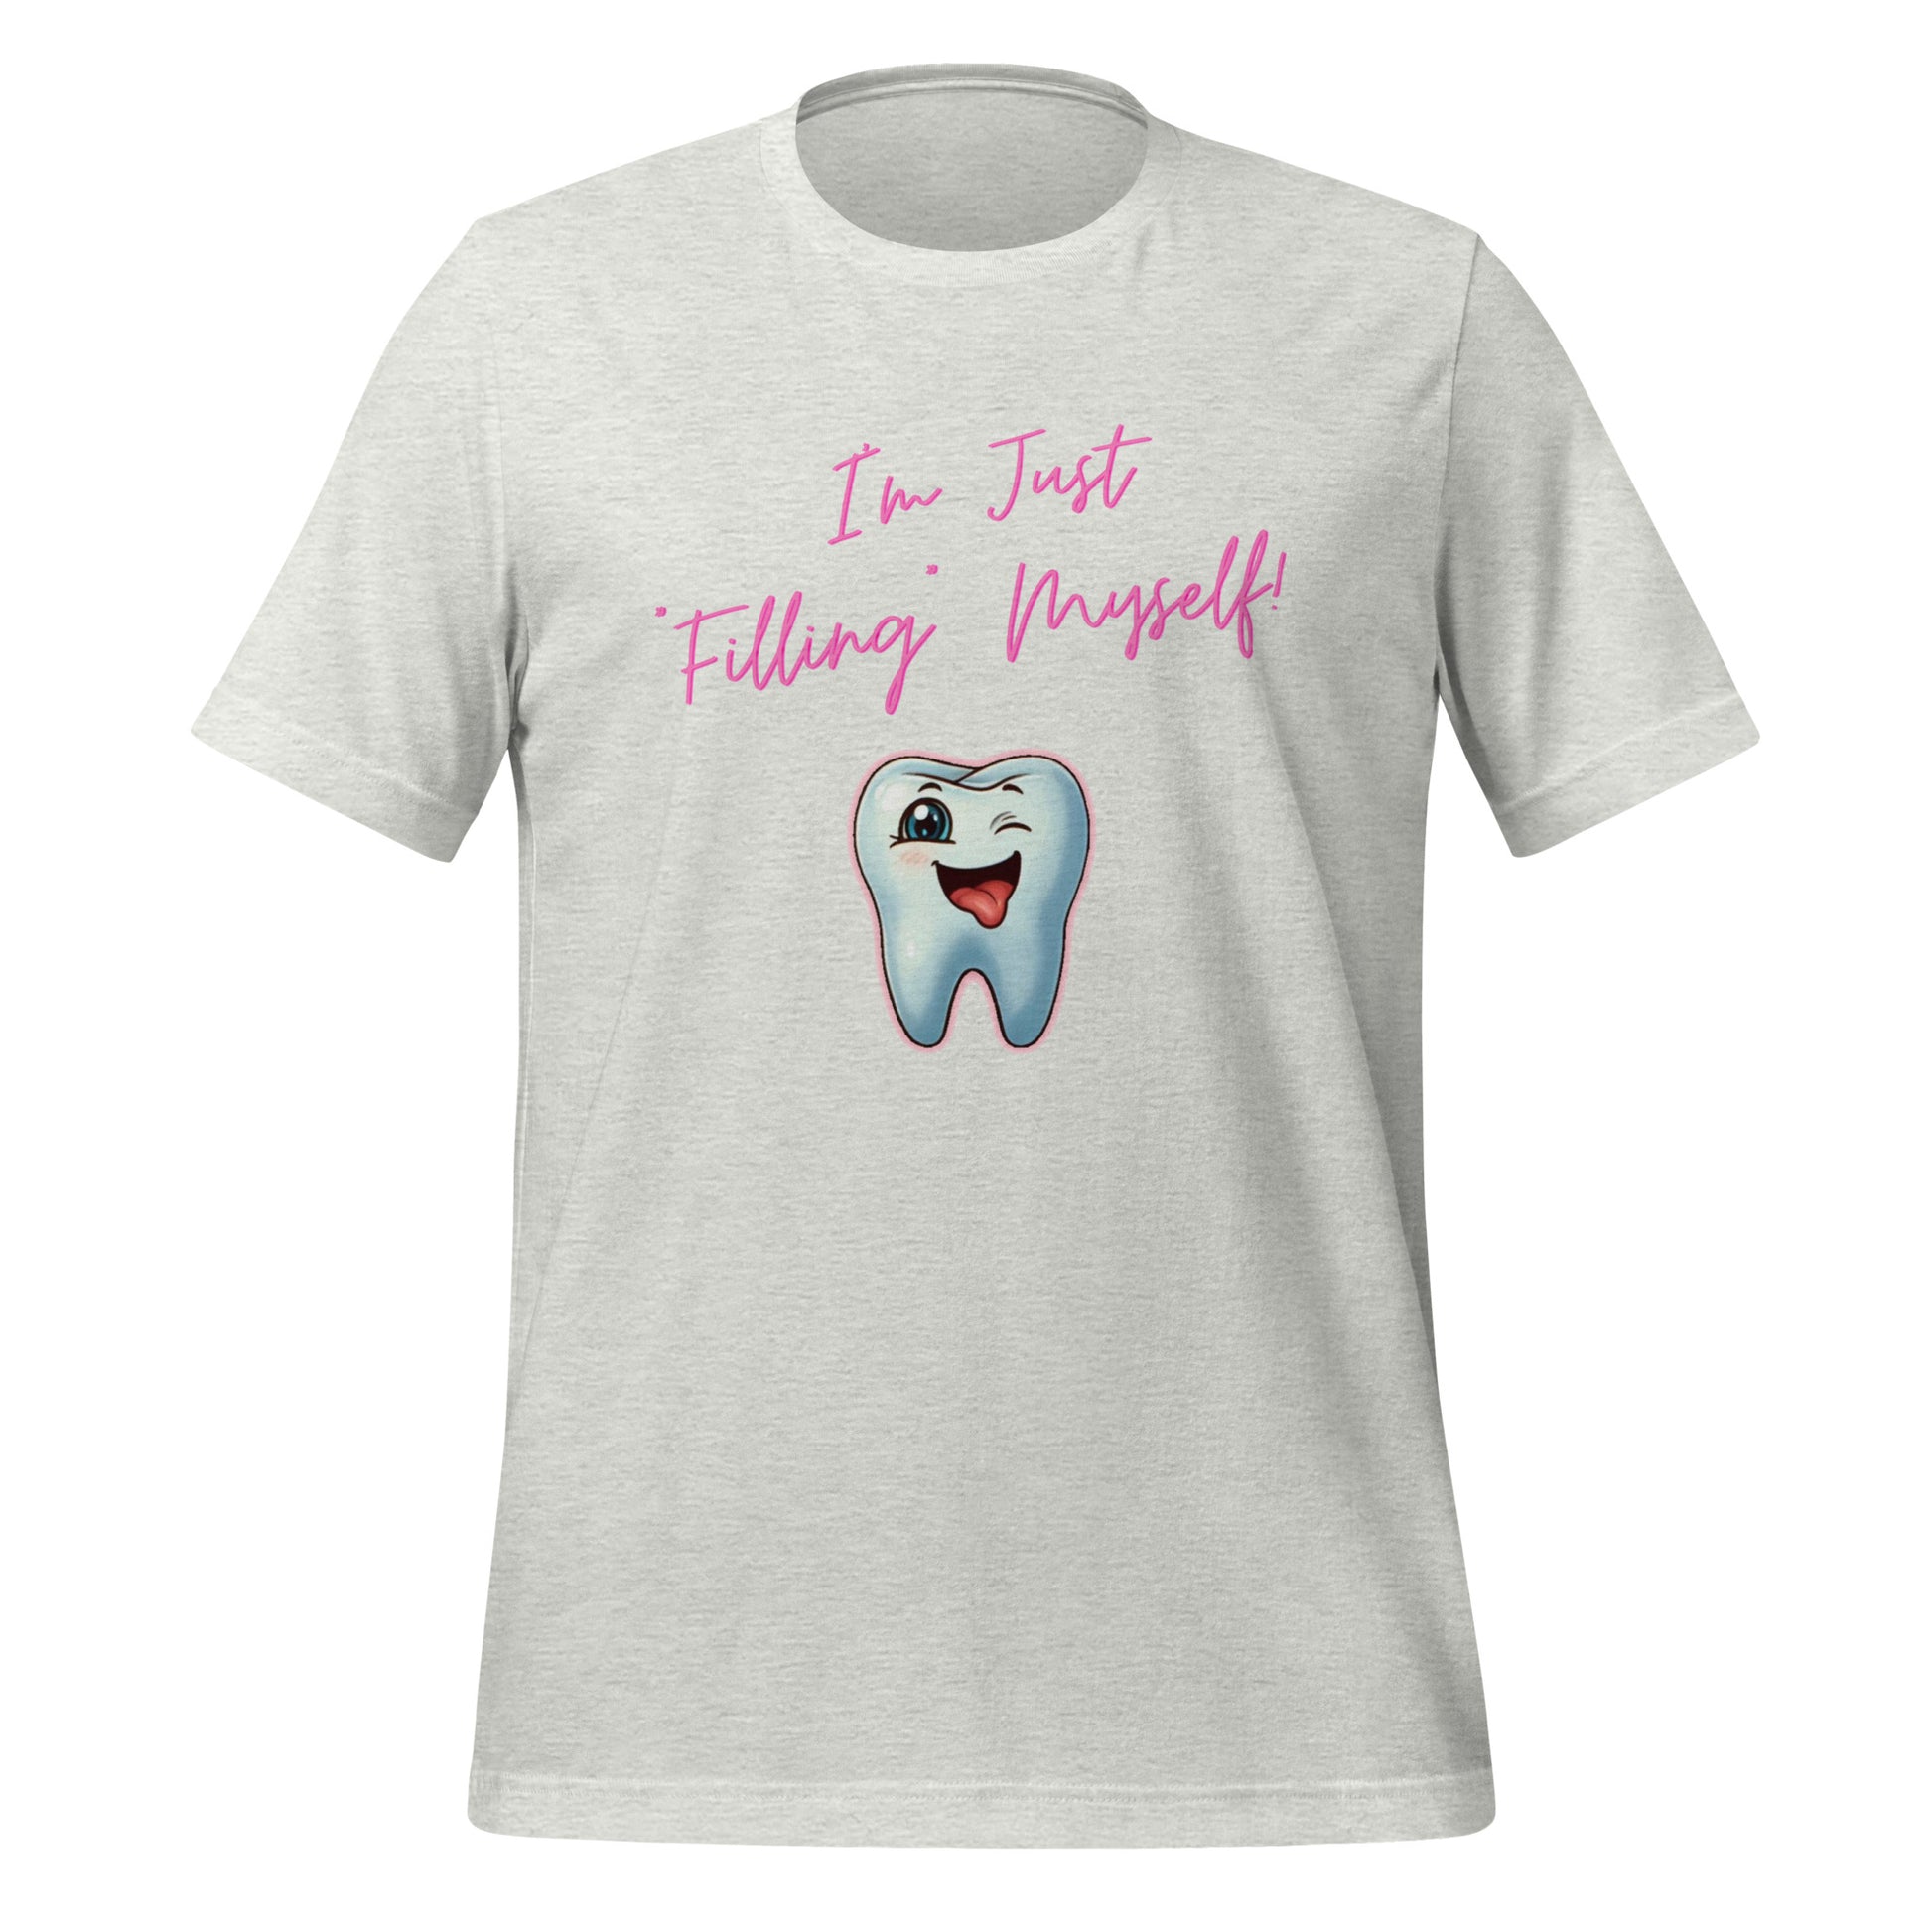 Flirtatious winking cartoon tooth character with the phrase "I'm just filling myself!" Ideal for a funny dental t-shirt or a cute dental assistant shirt. Ash color. 